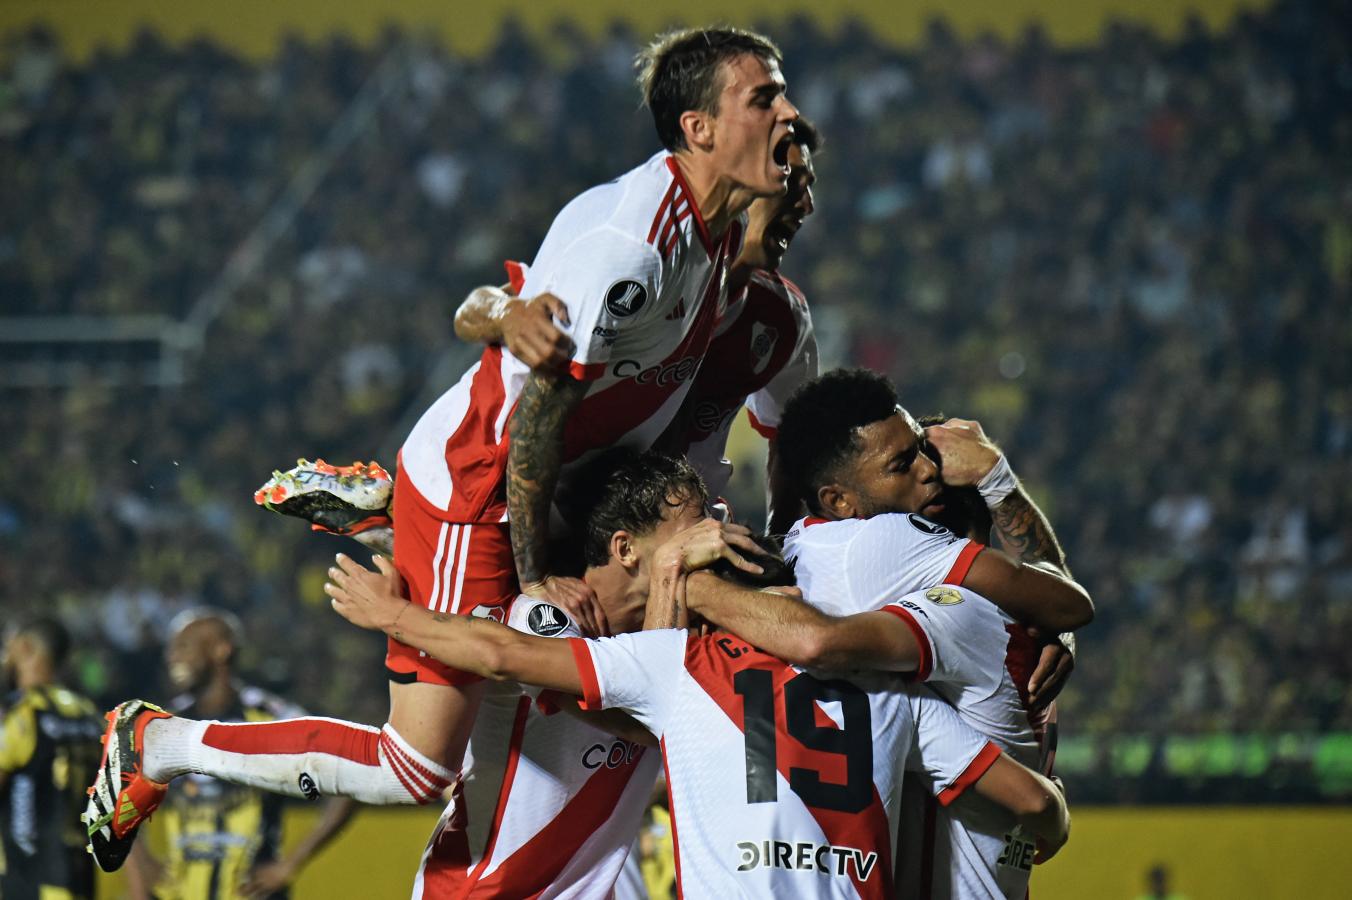 River showed its face and made its debut with a victory in the Libertadores